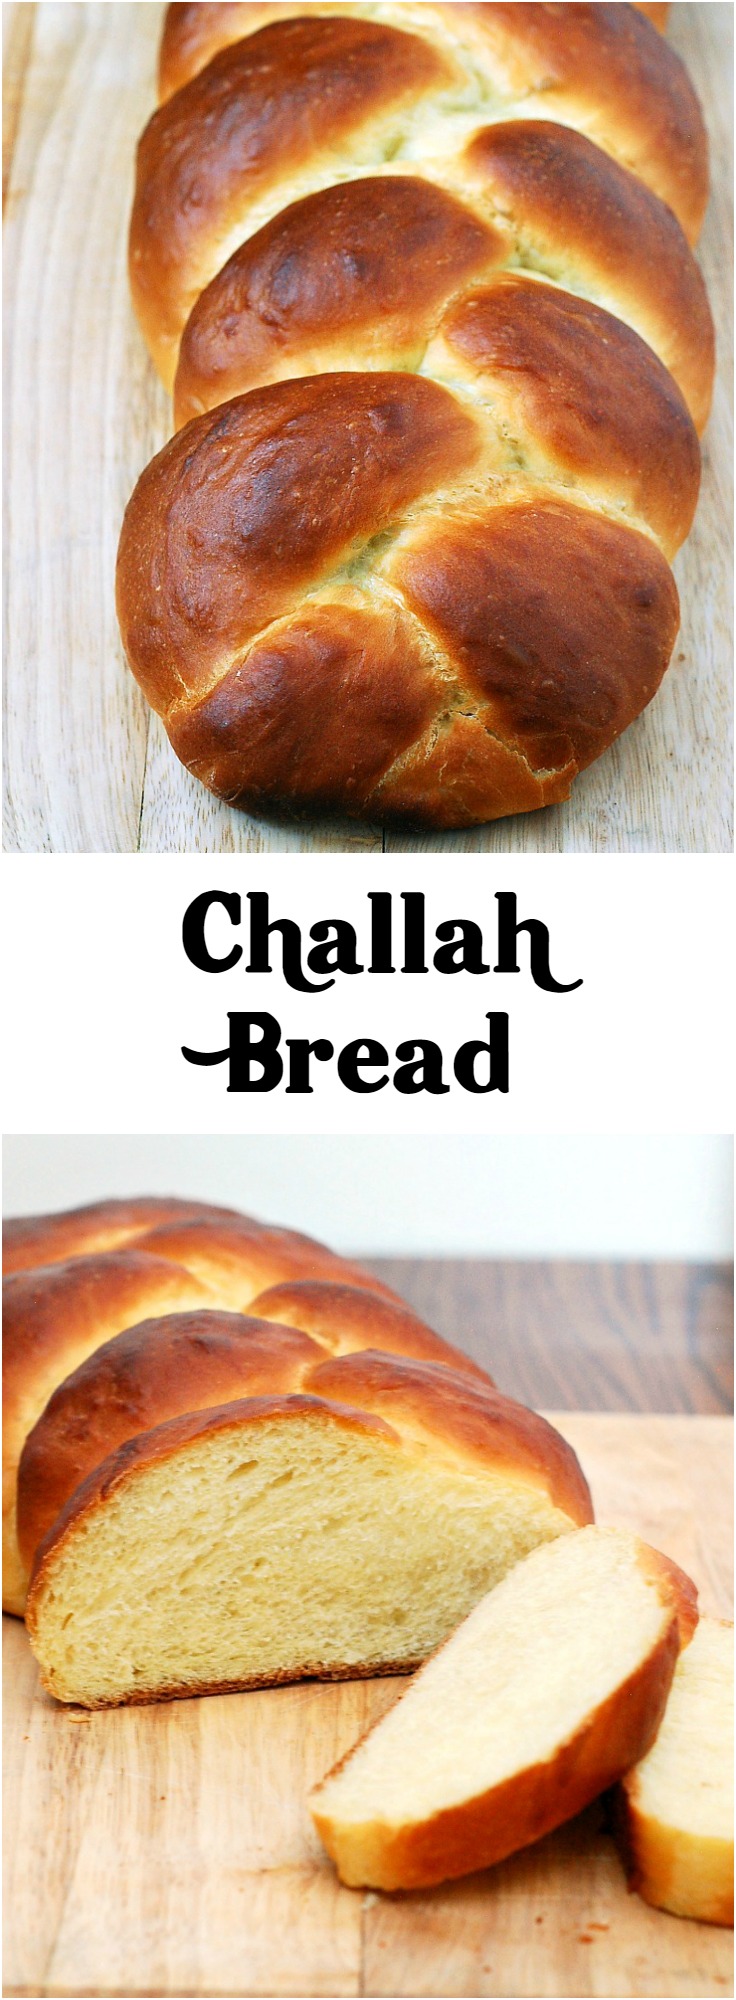 Challah is bread that is enriched with eggs, and traditionally eaten by members of the Jewish religion on the Sabbath and religious holidays. Similar to brioche, it also makes a tasty French toast. #TwelveLoaves